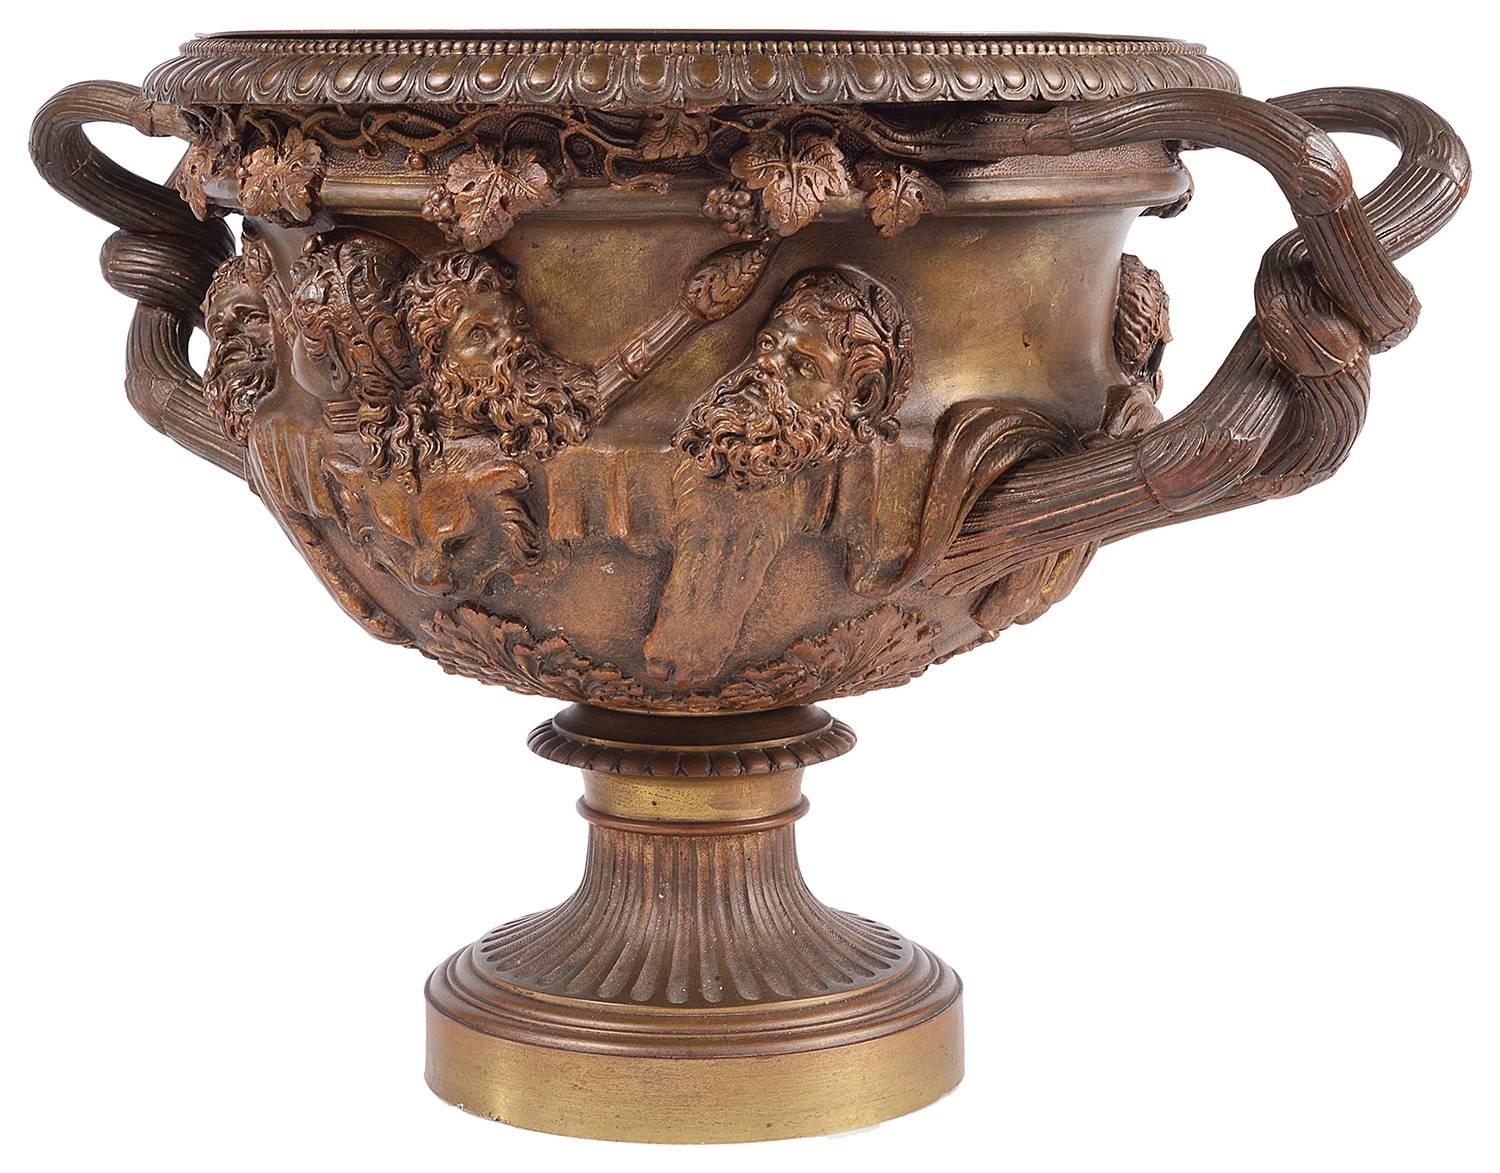 A good quality 19th century bronze two handle Warwick vase.

The Warwick vase is an ancient Roman marble vase with Bacchic ornament that was discovered at Hadrian's Villa, Tivoli about 1771 by Gavin Hamilton, a Scottish painter-antiquarian and art